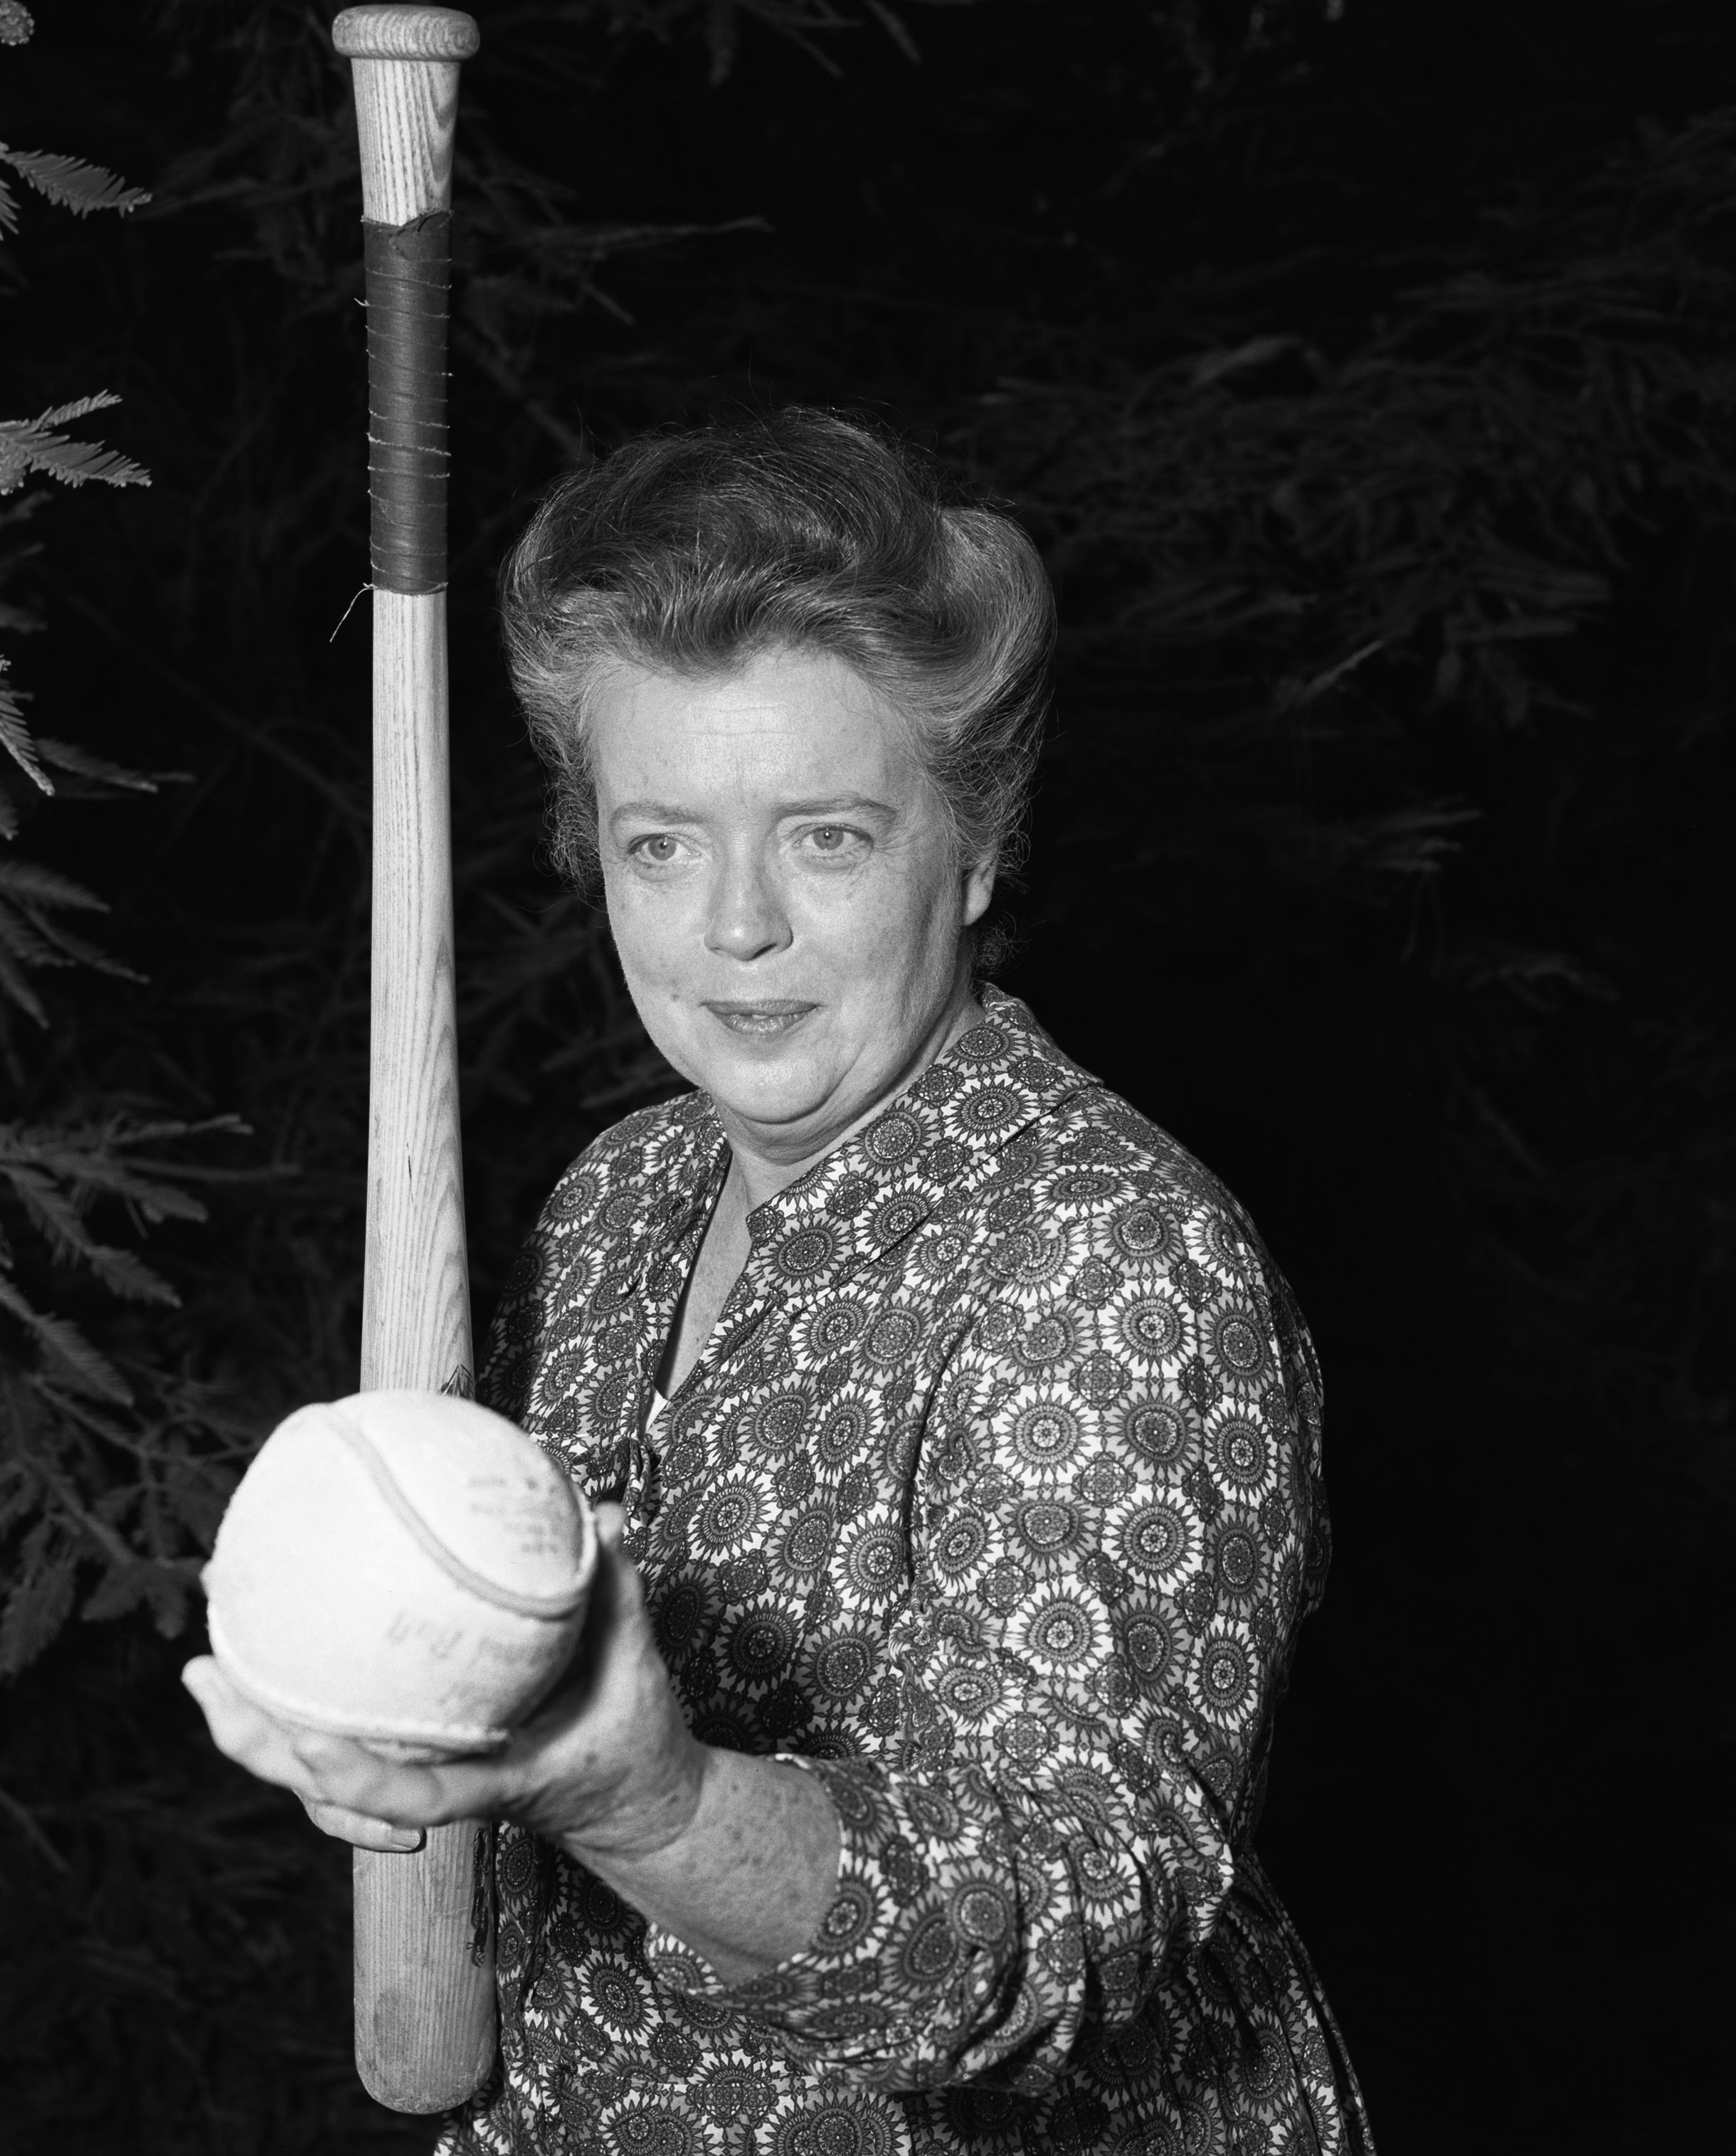 Frances Bavier poses with a bat and ball as Aunt Bee on 'The Andy Griffith Show'